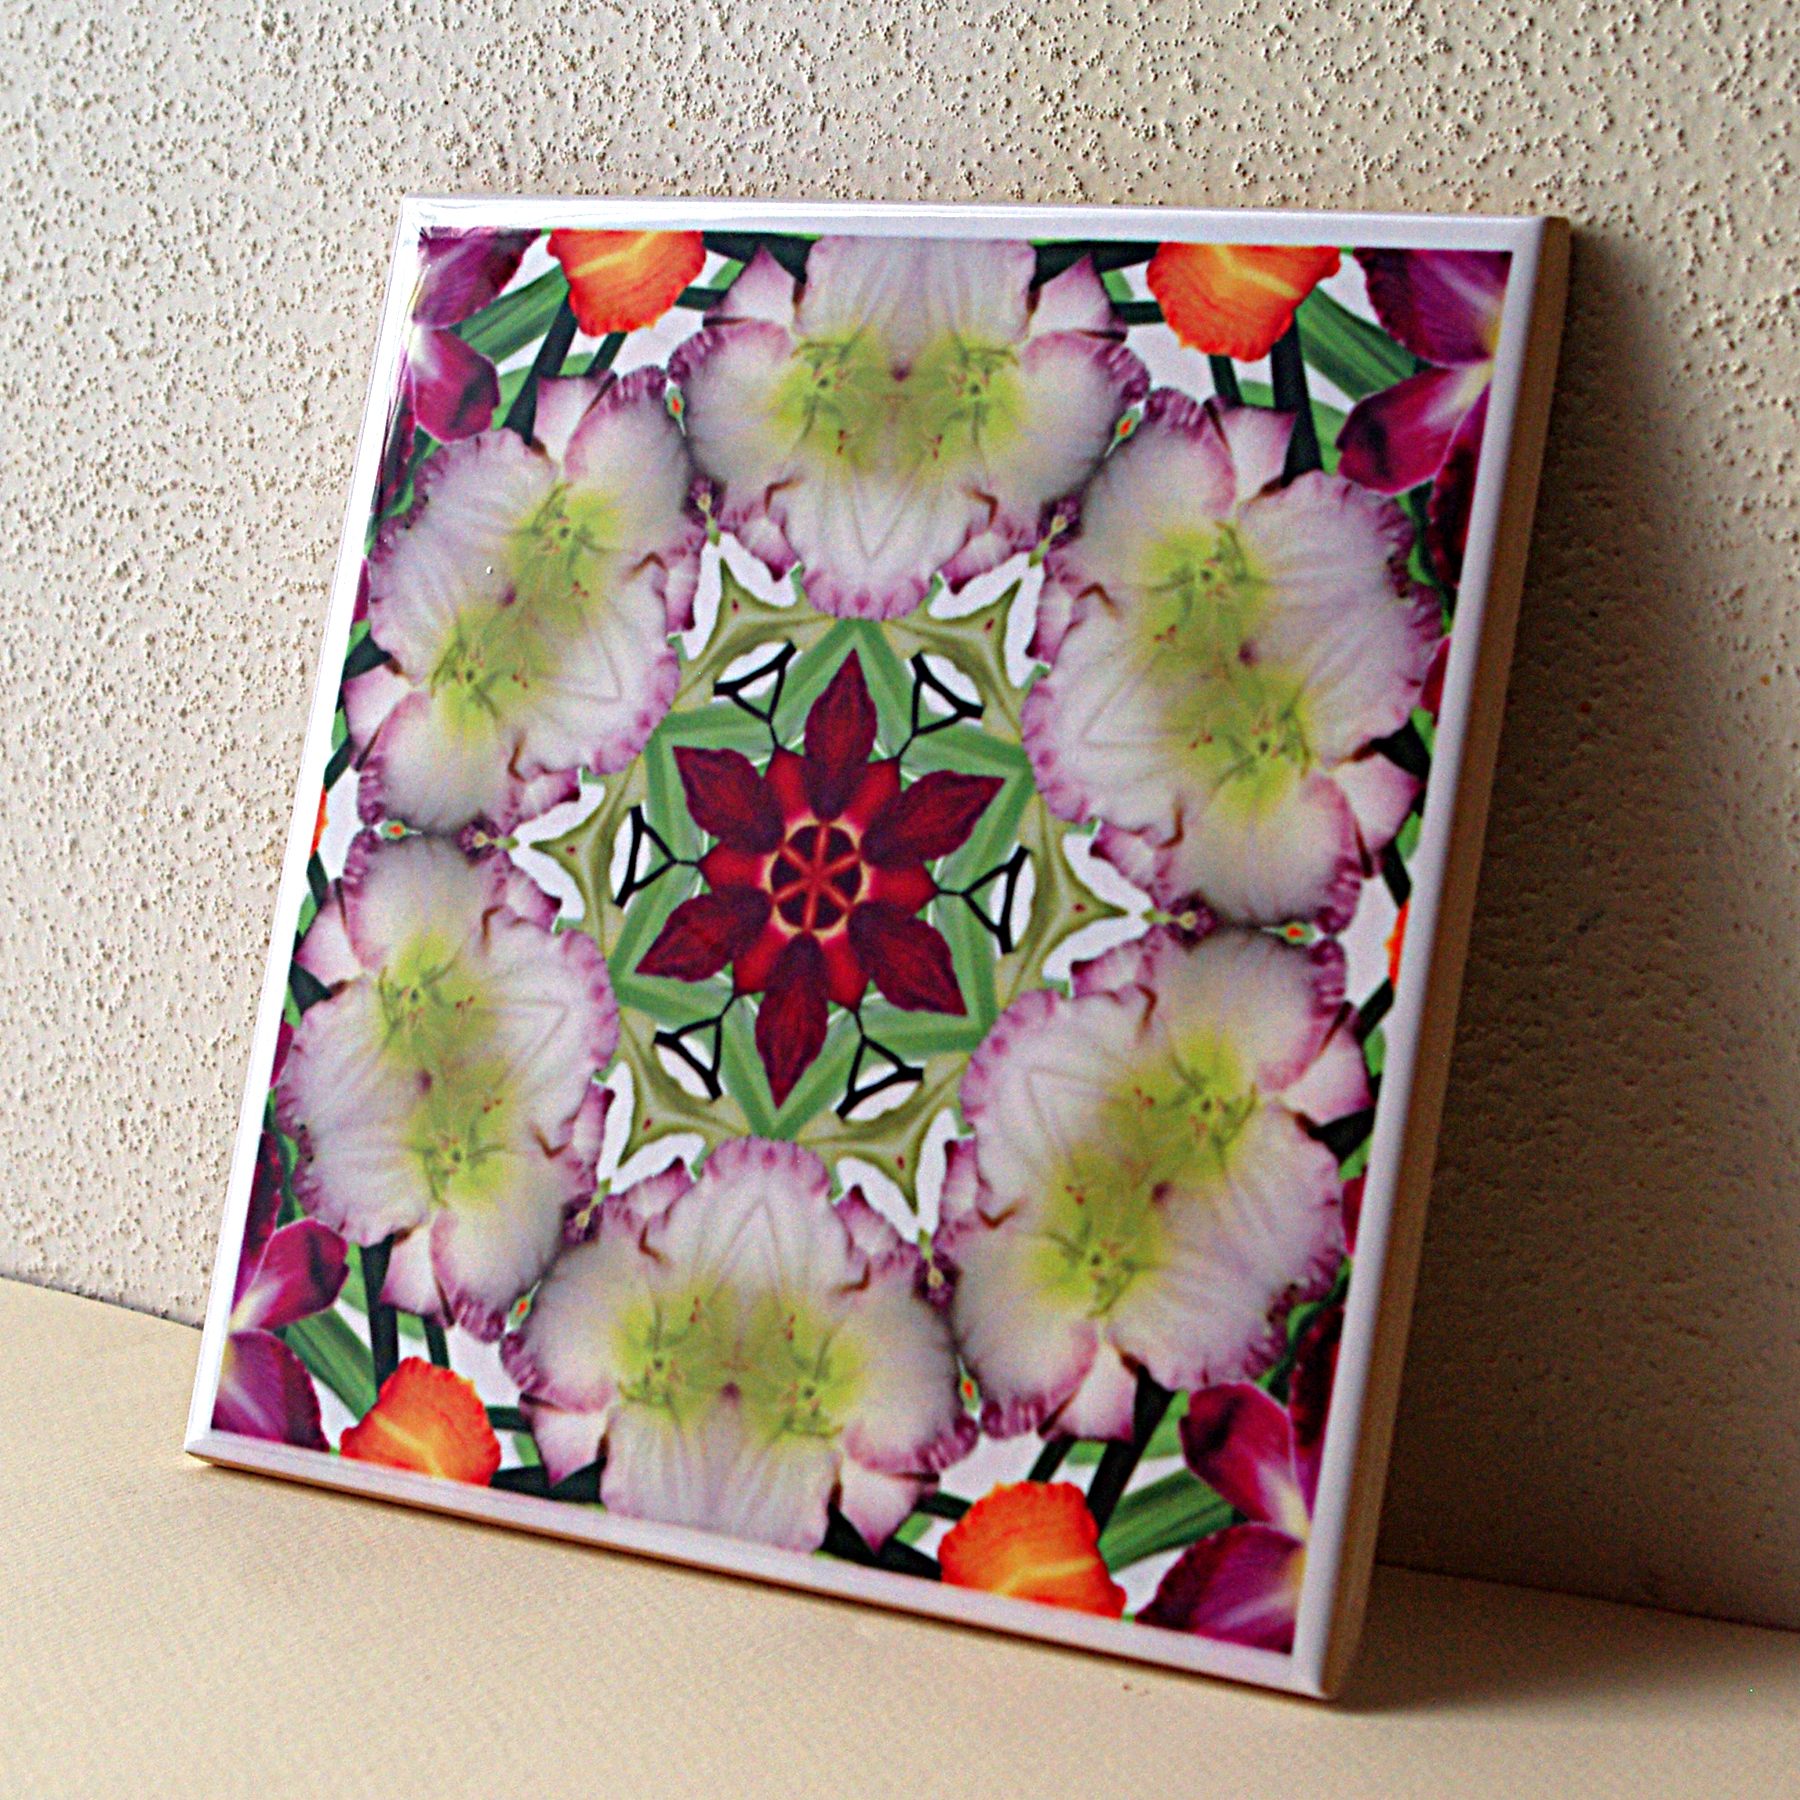 Tiles with flower power made with sublimation printing